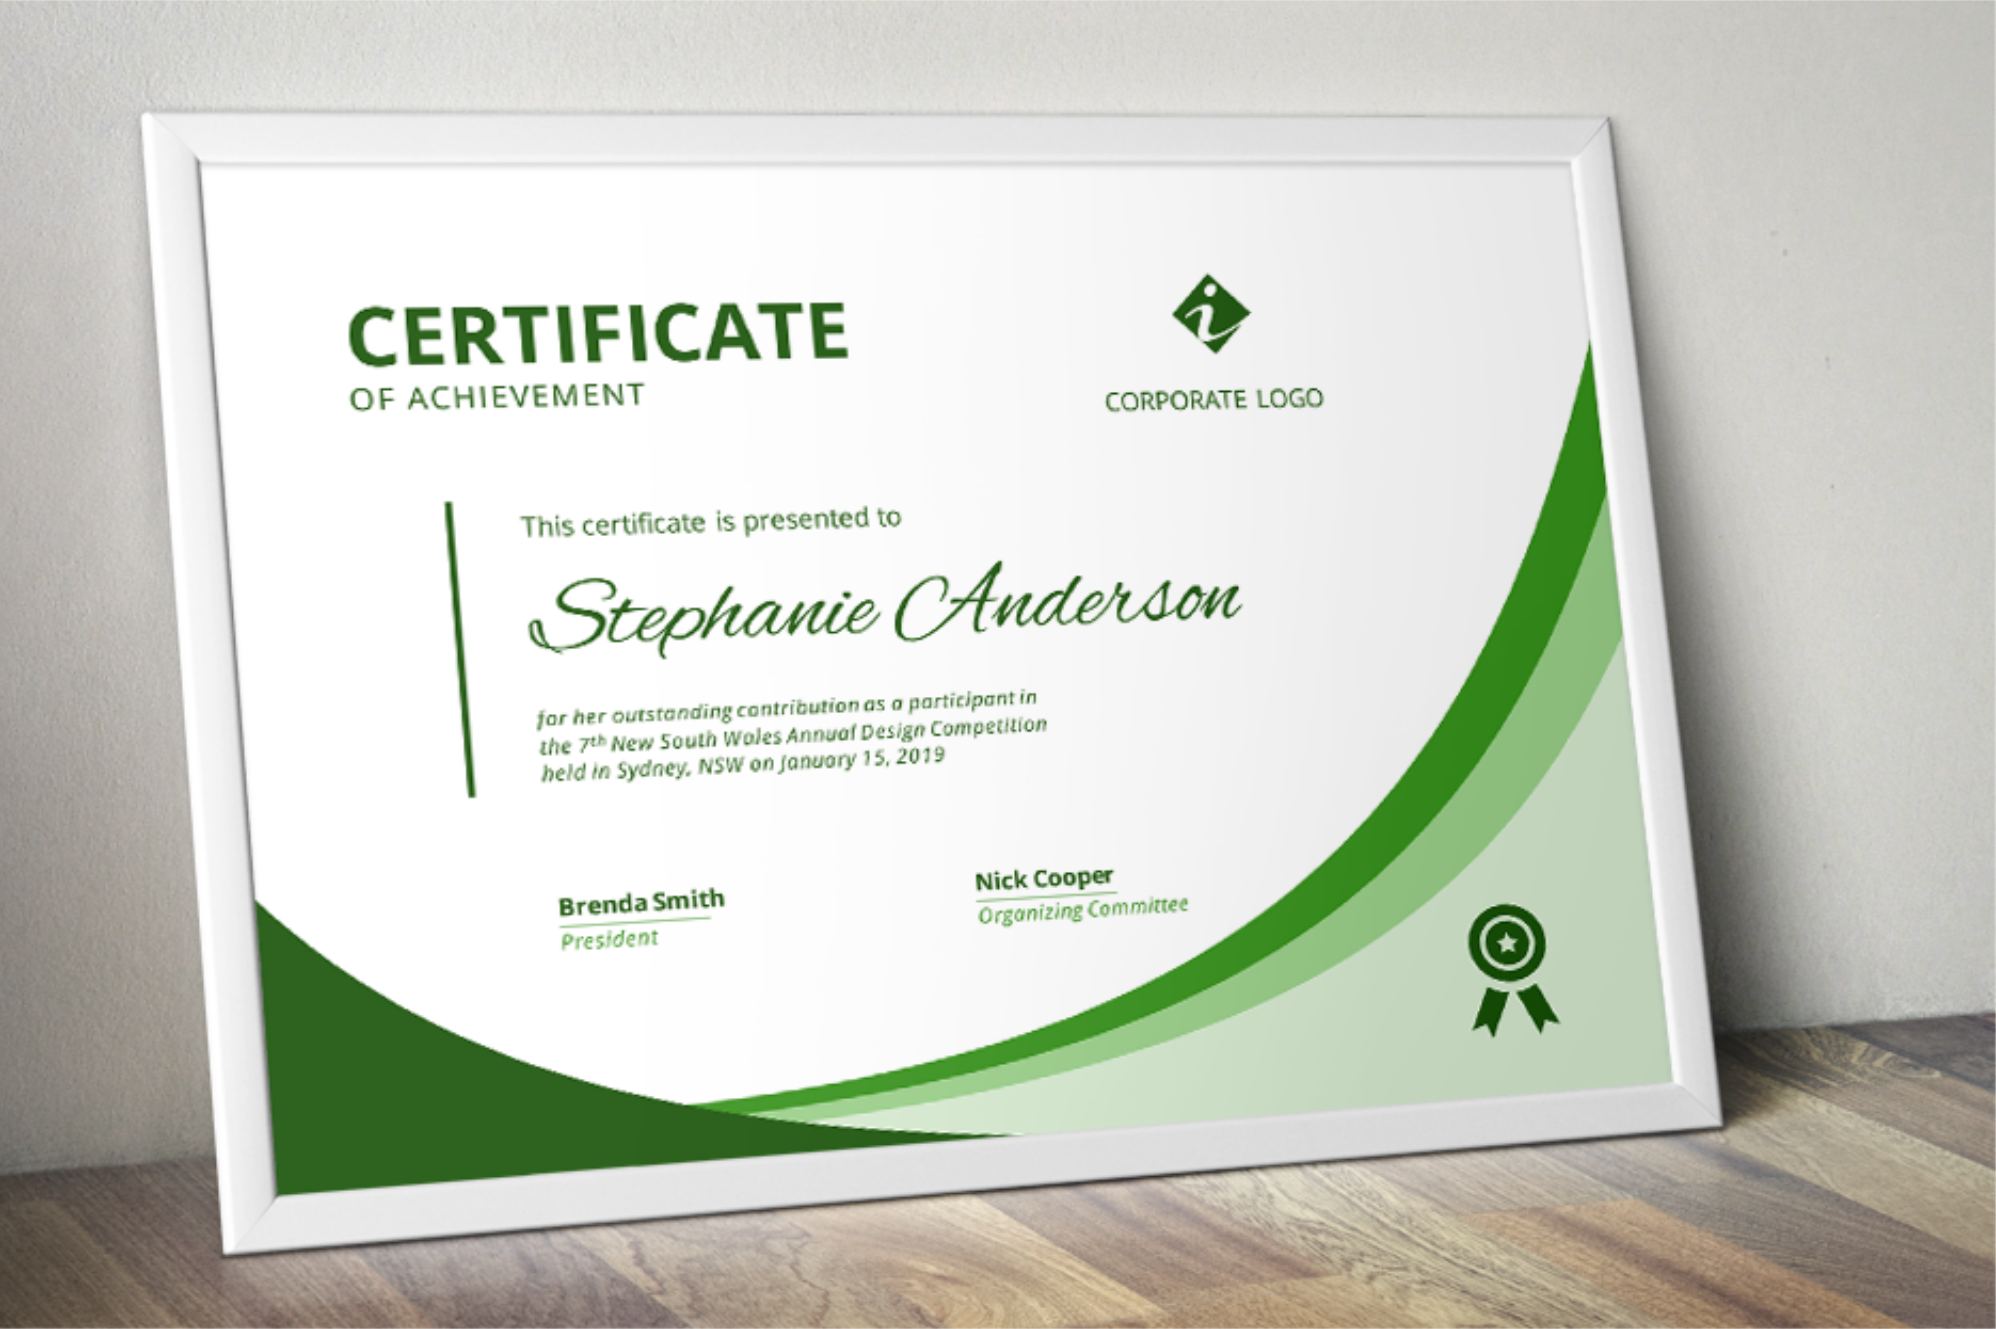 free-certificate-templates-for-word-2010-lopteaustralian